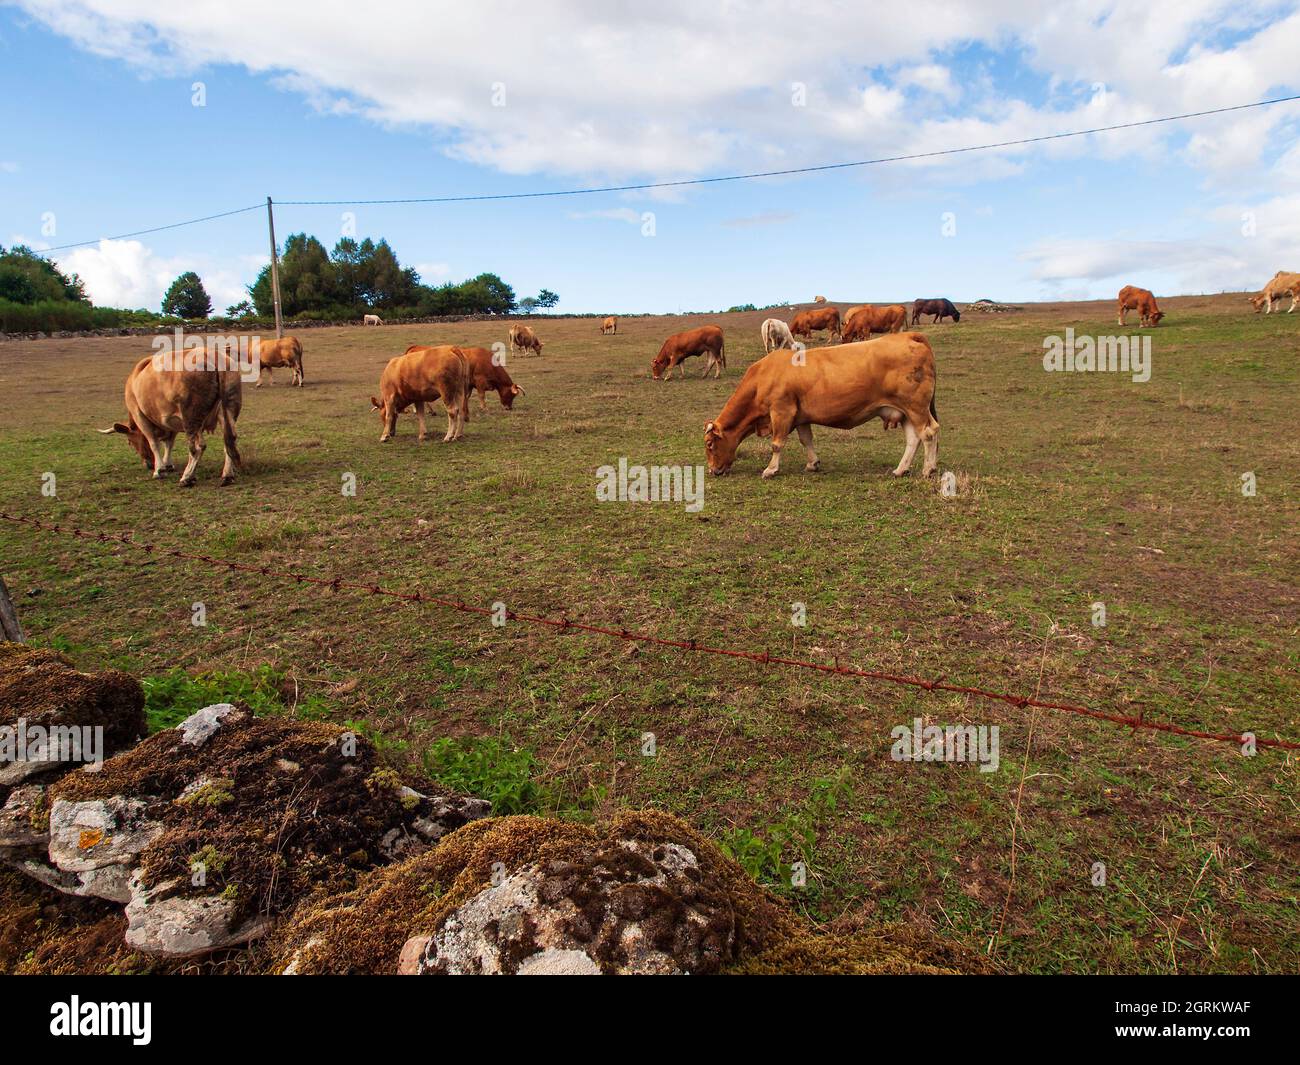 Cows grazing peacefully in a Galician meadow on a blue sky day with clouds. Stock Photo